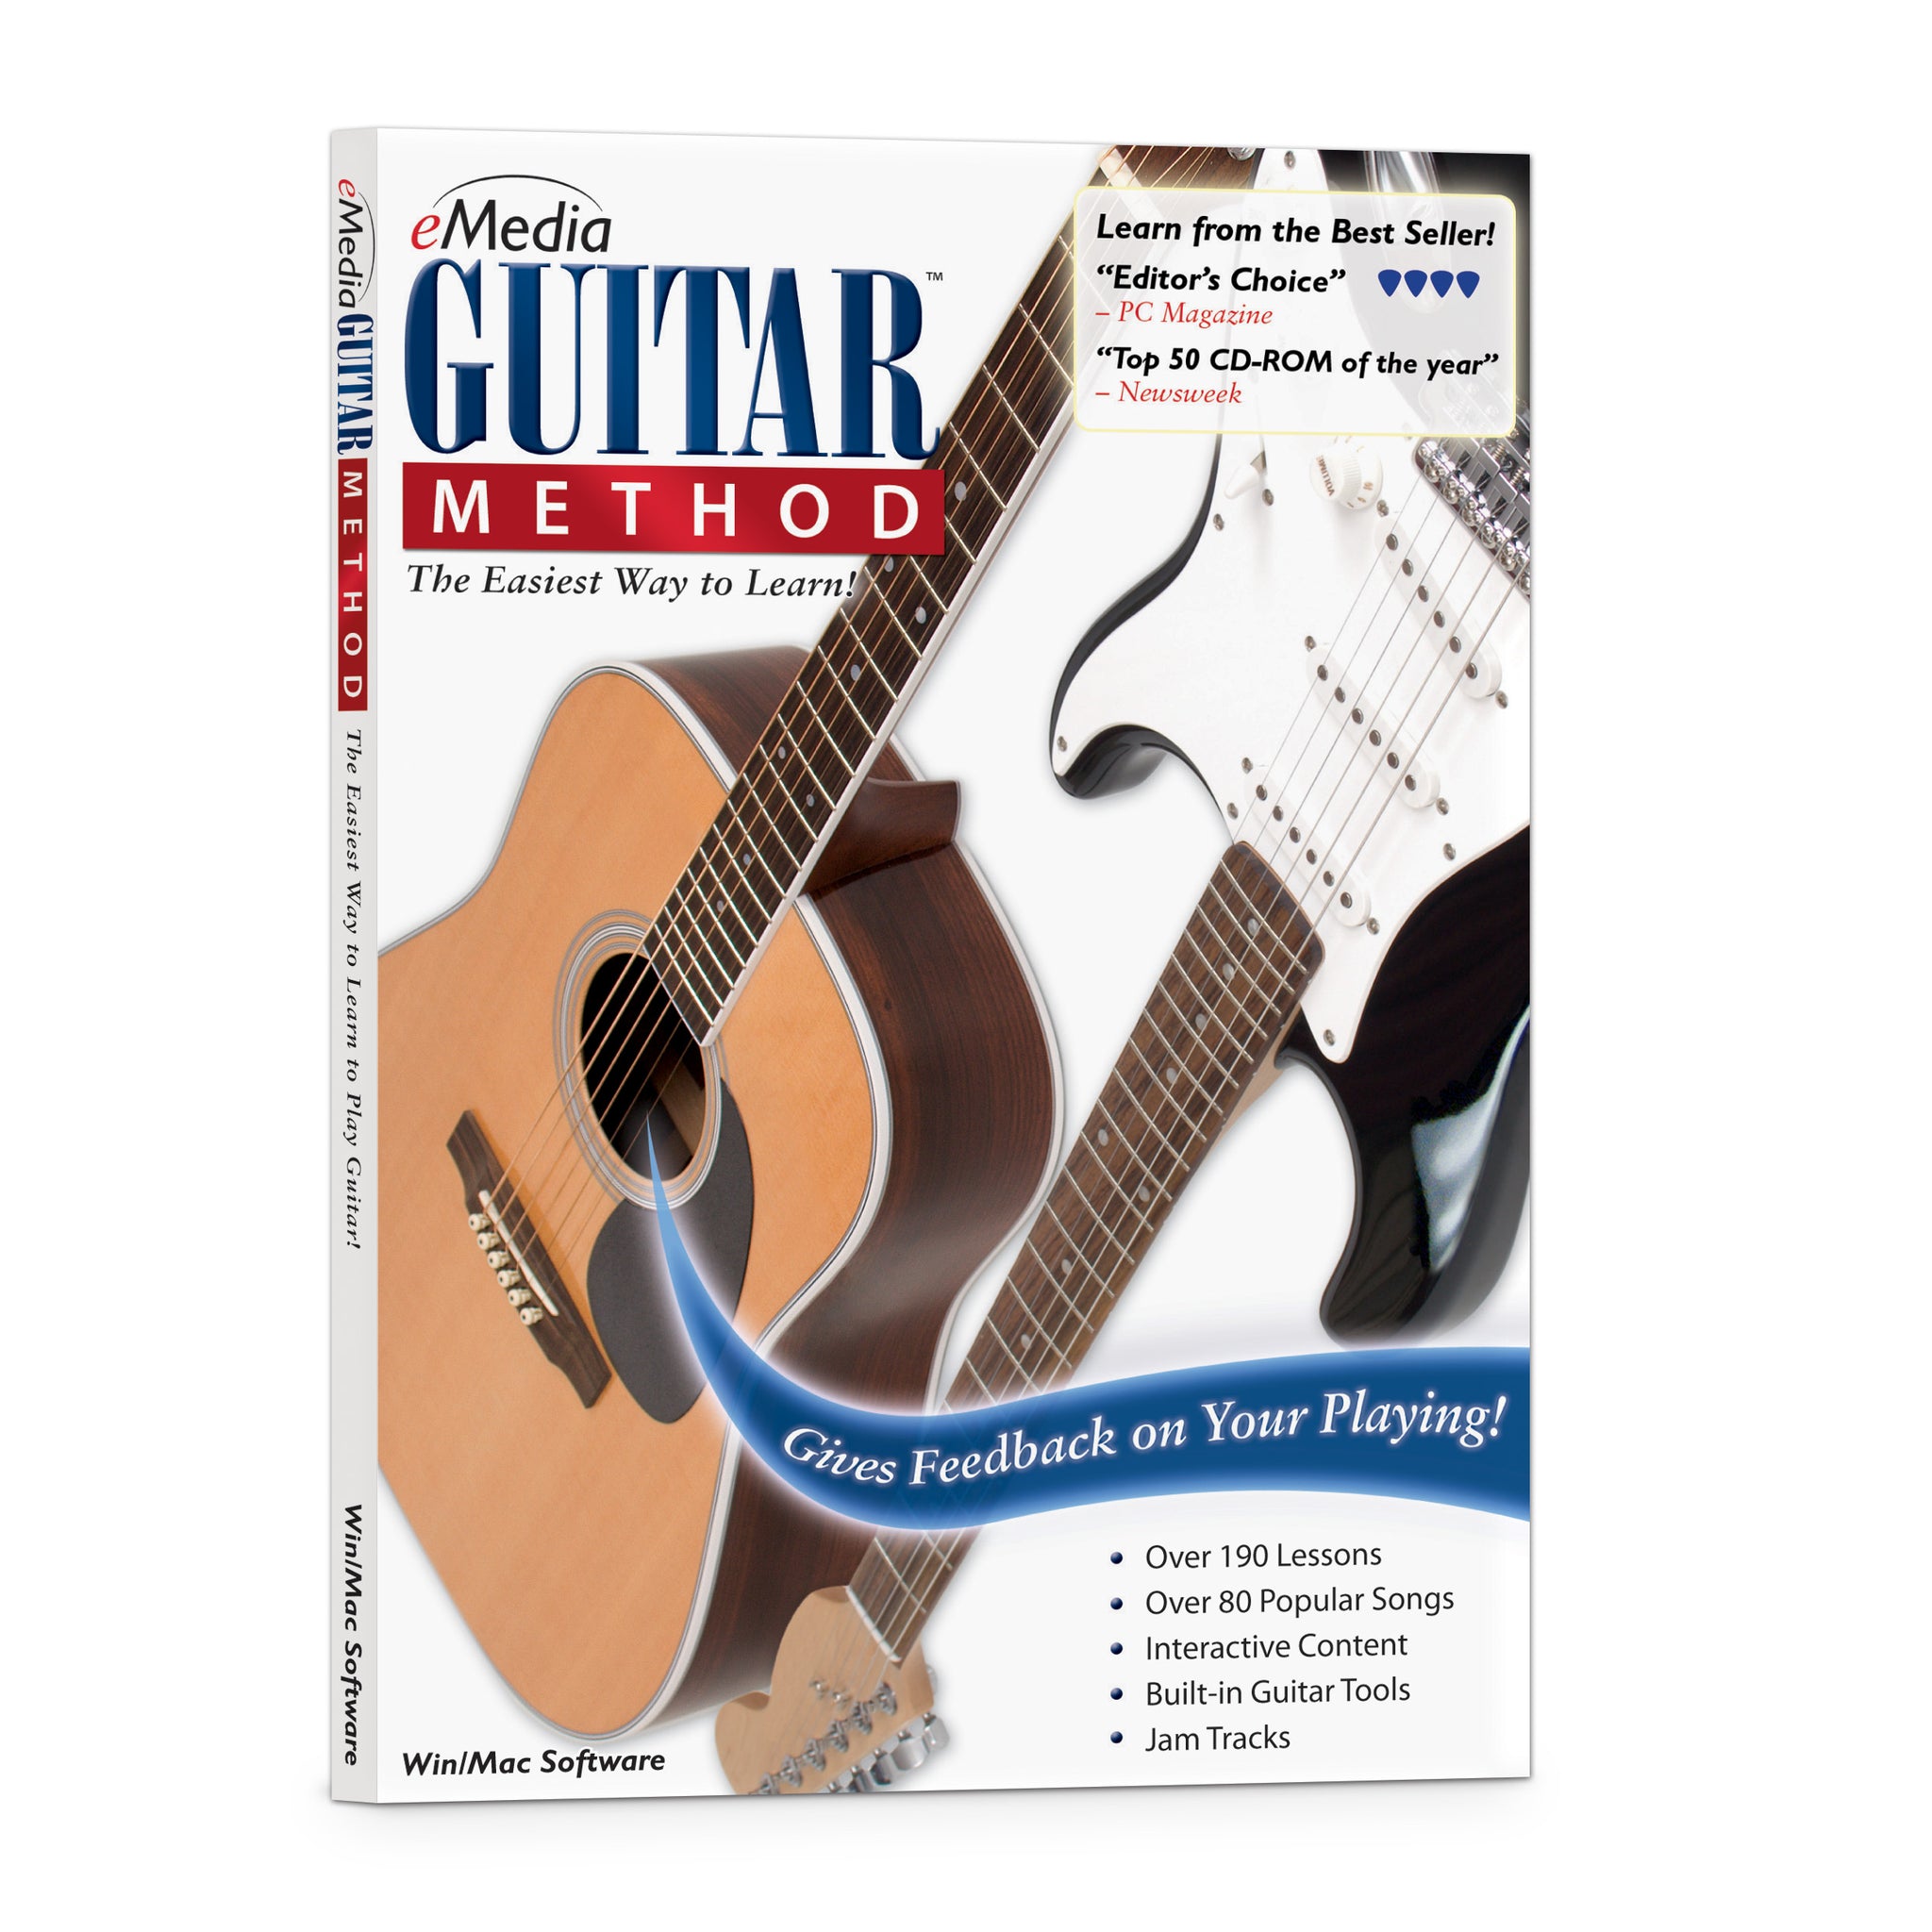 learning to play guitar chords the easy way